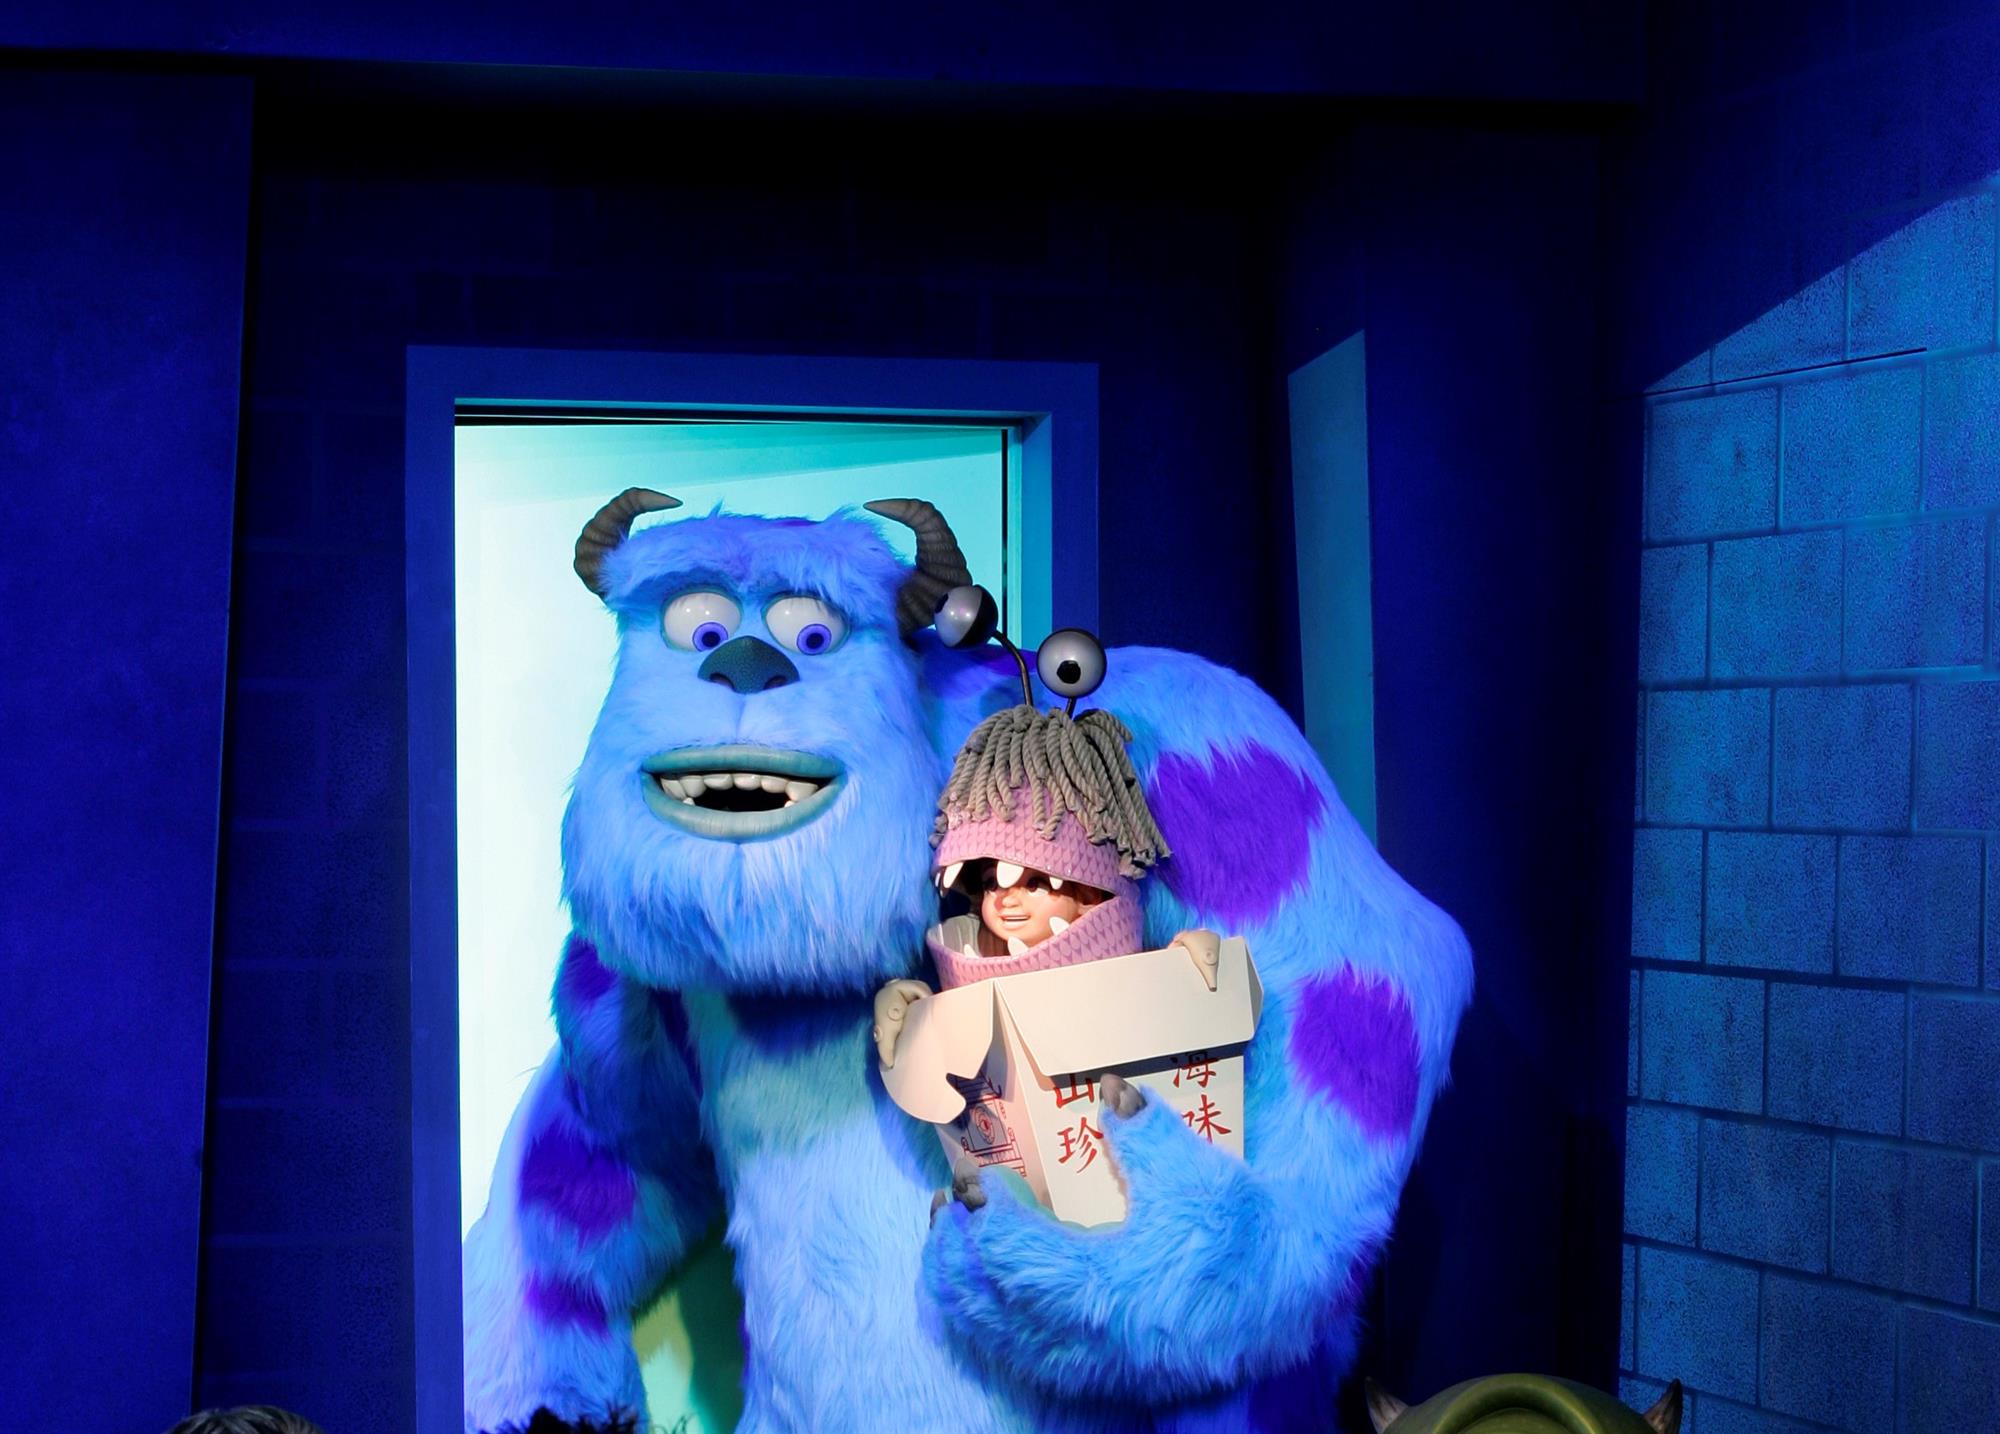 Monsters, Inc. Mike & Sulley to the Rescue! - Disney California